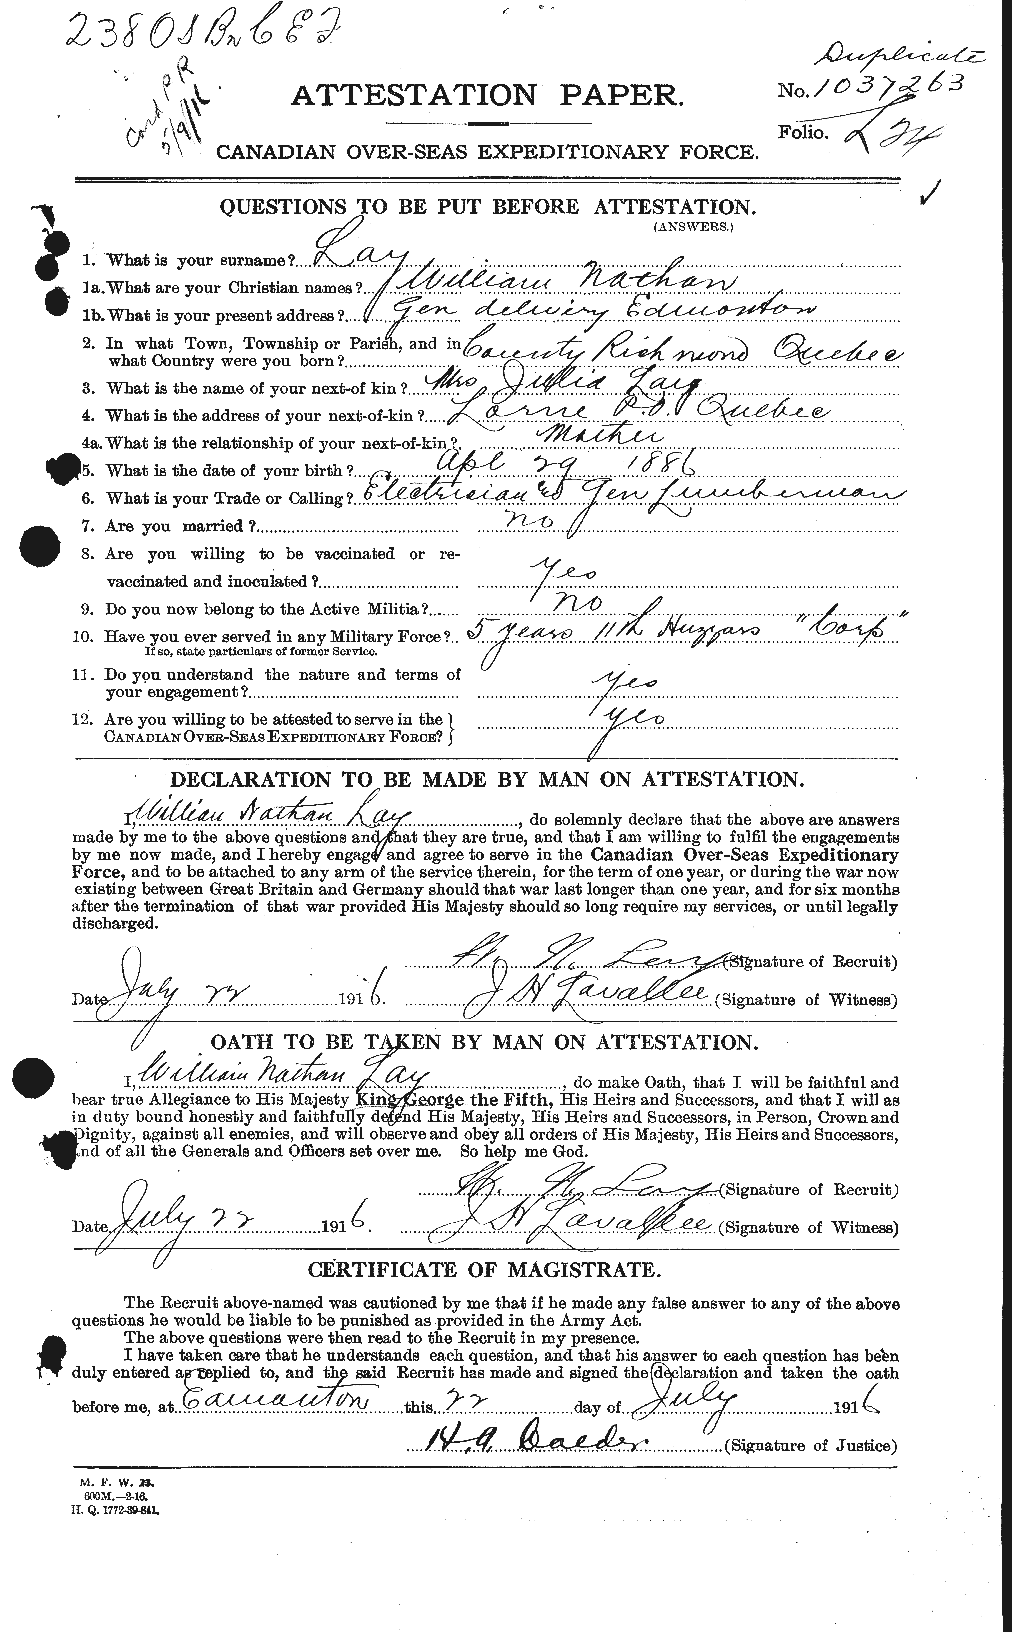 Personnel Records of the First World War - CEF 458359a